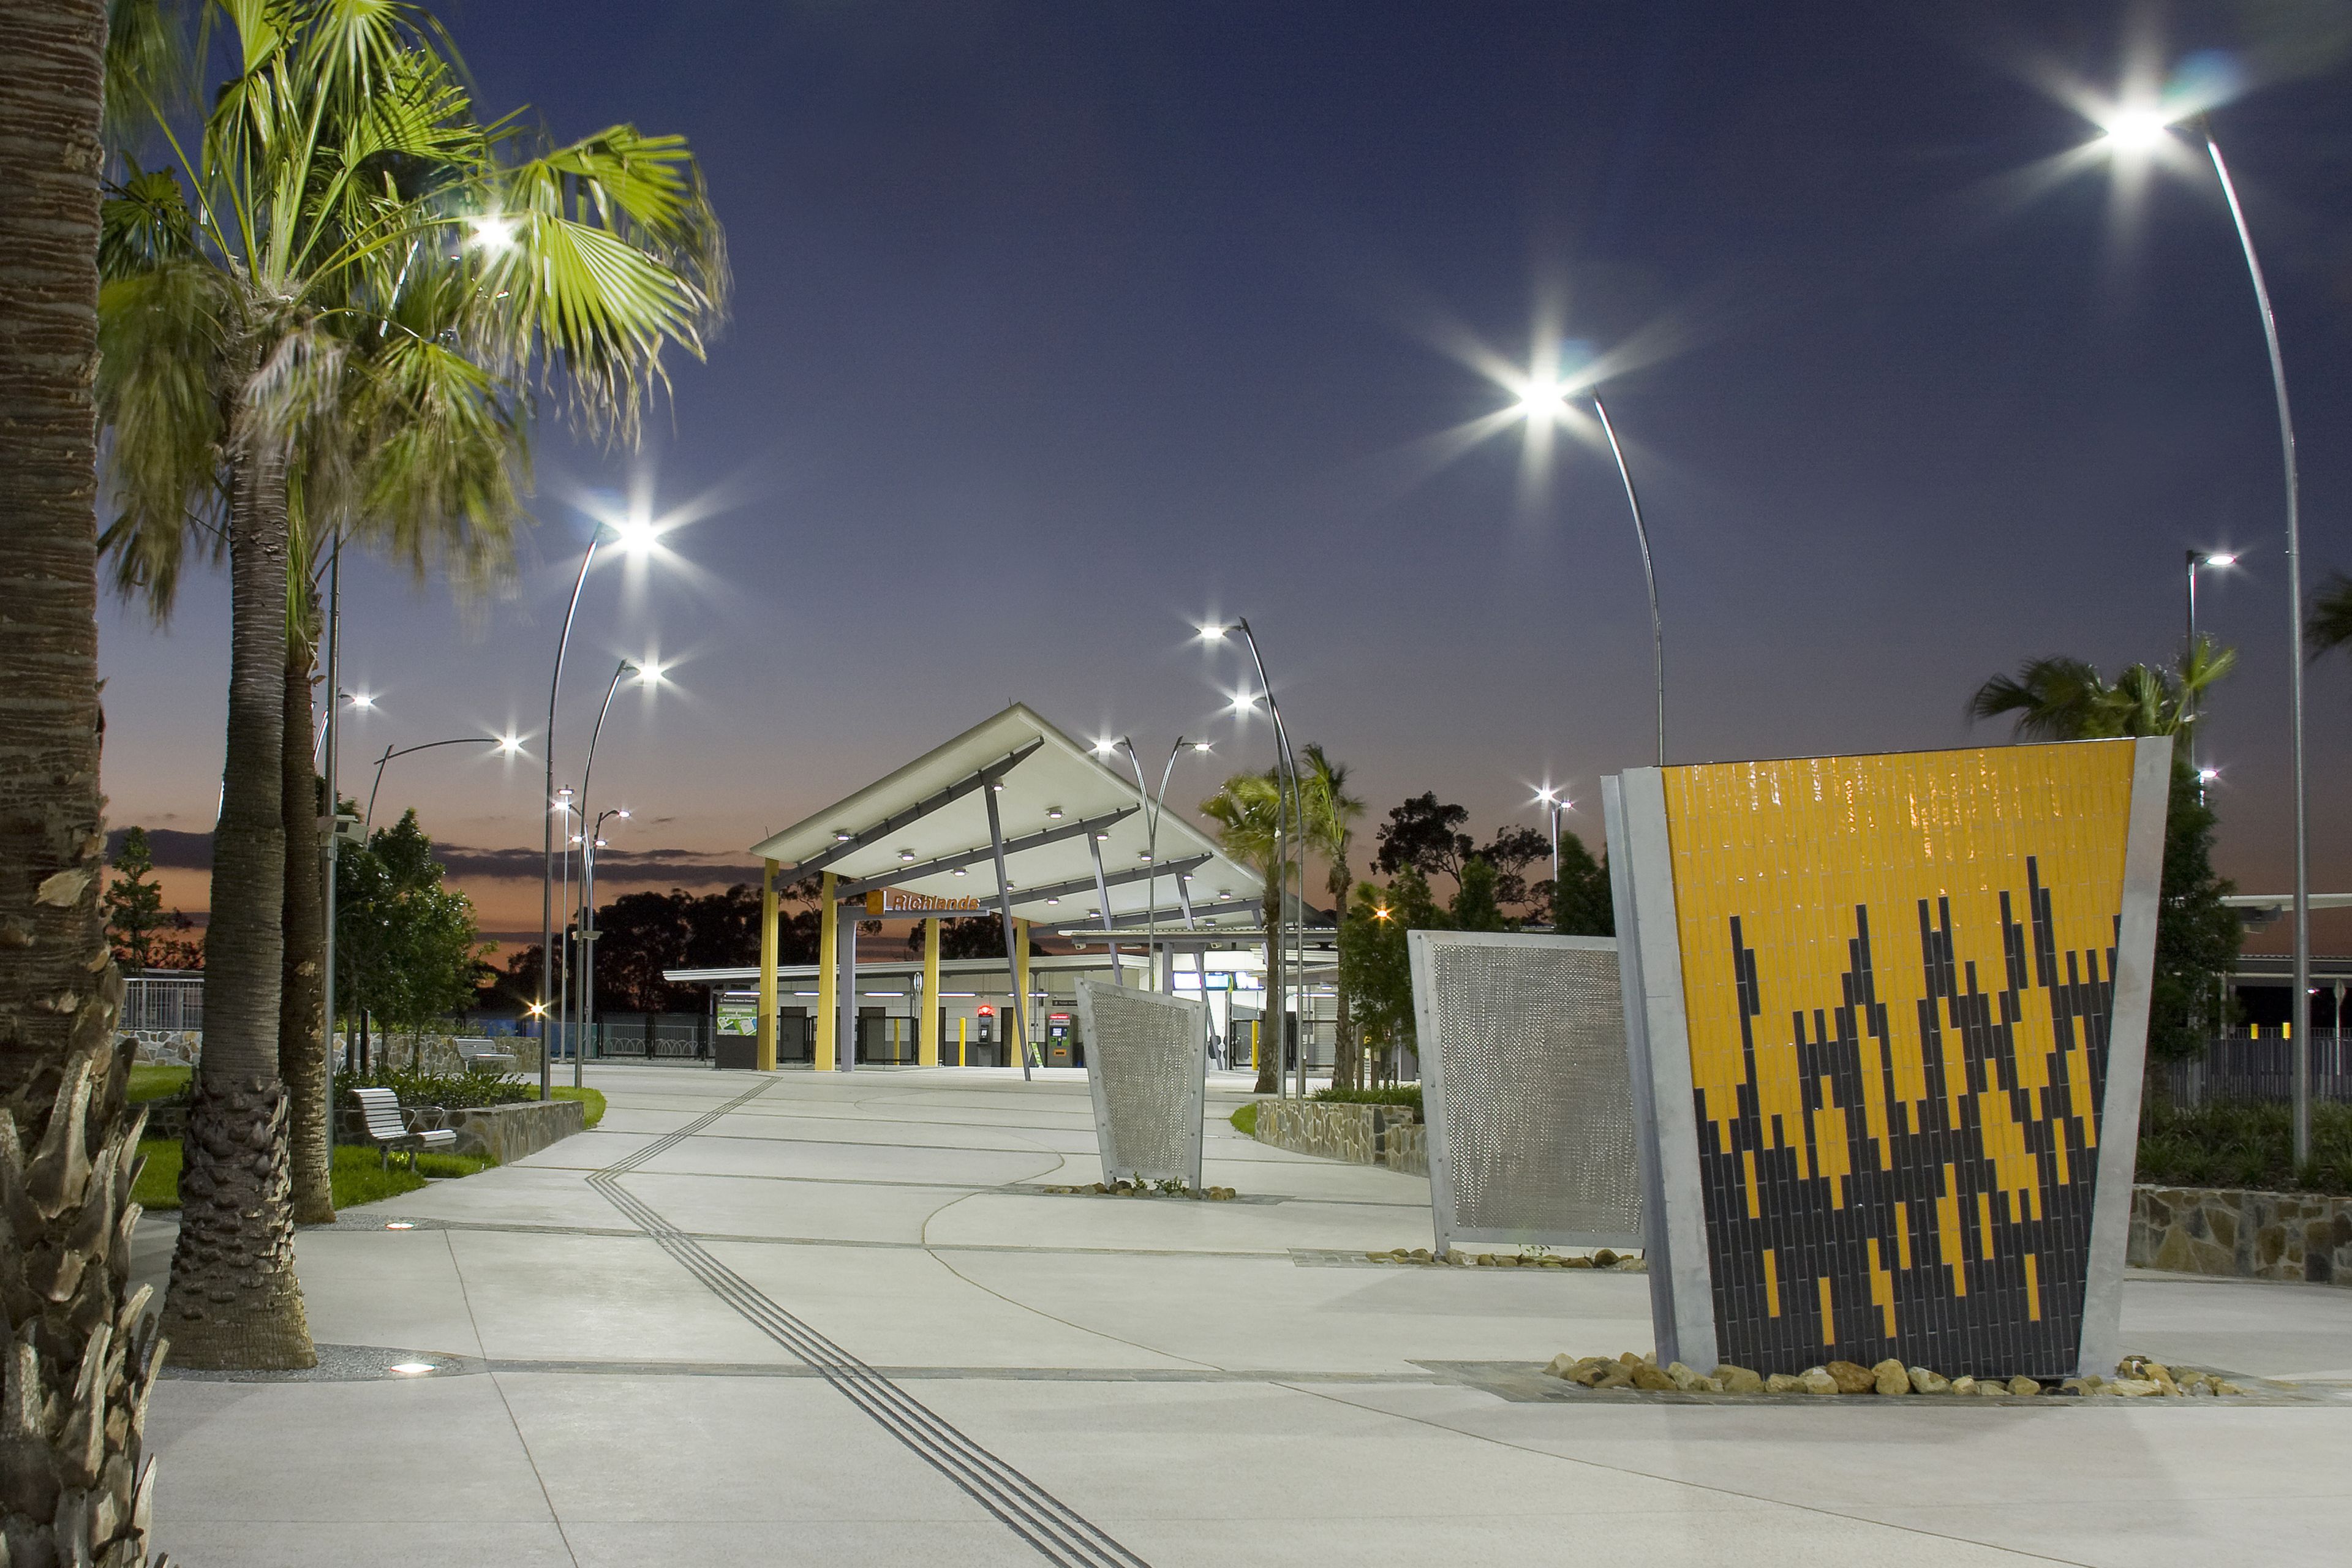 Smooth finished concrete sidewalk at transport station in Brisbane, Australia with guides for blind, palm trees and yellow tiled sculpture